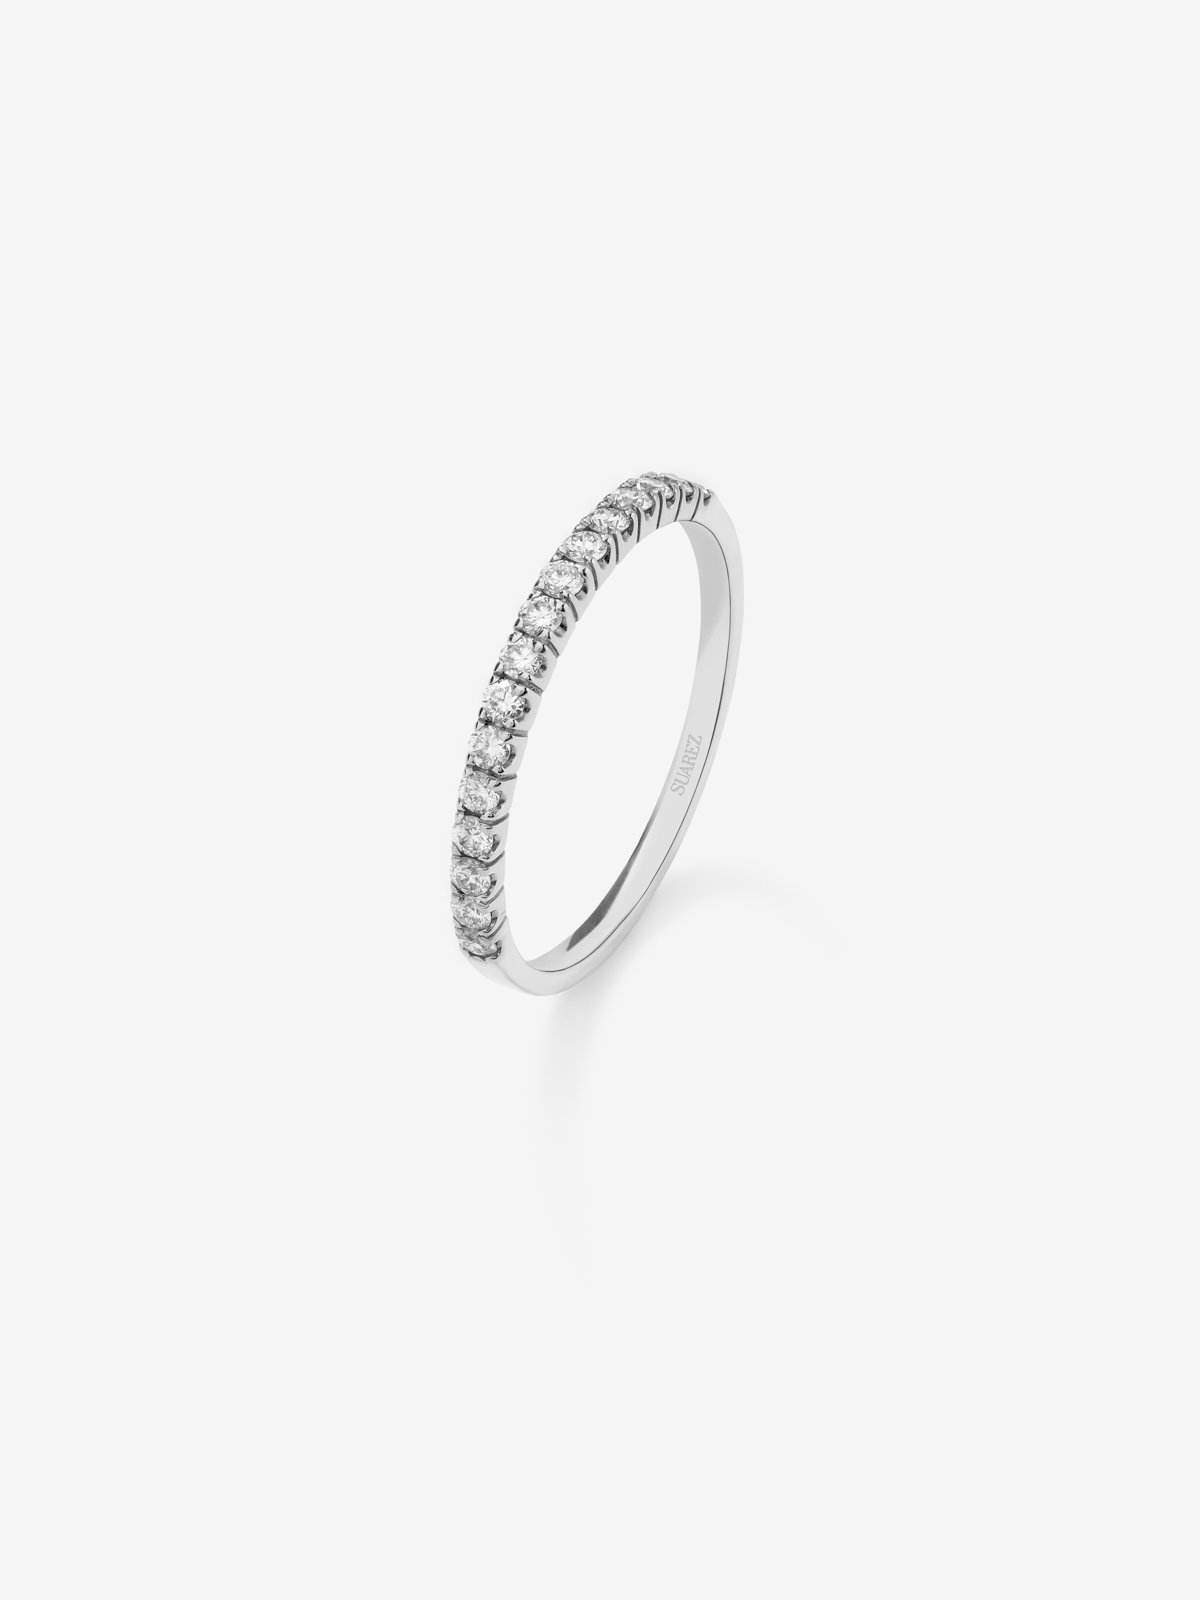 Half ring in 18K white gold with 16 brilliant-cut diamonds with a total of 0.24 cts